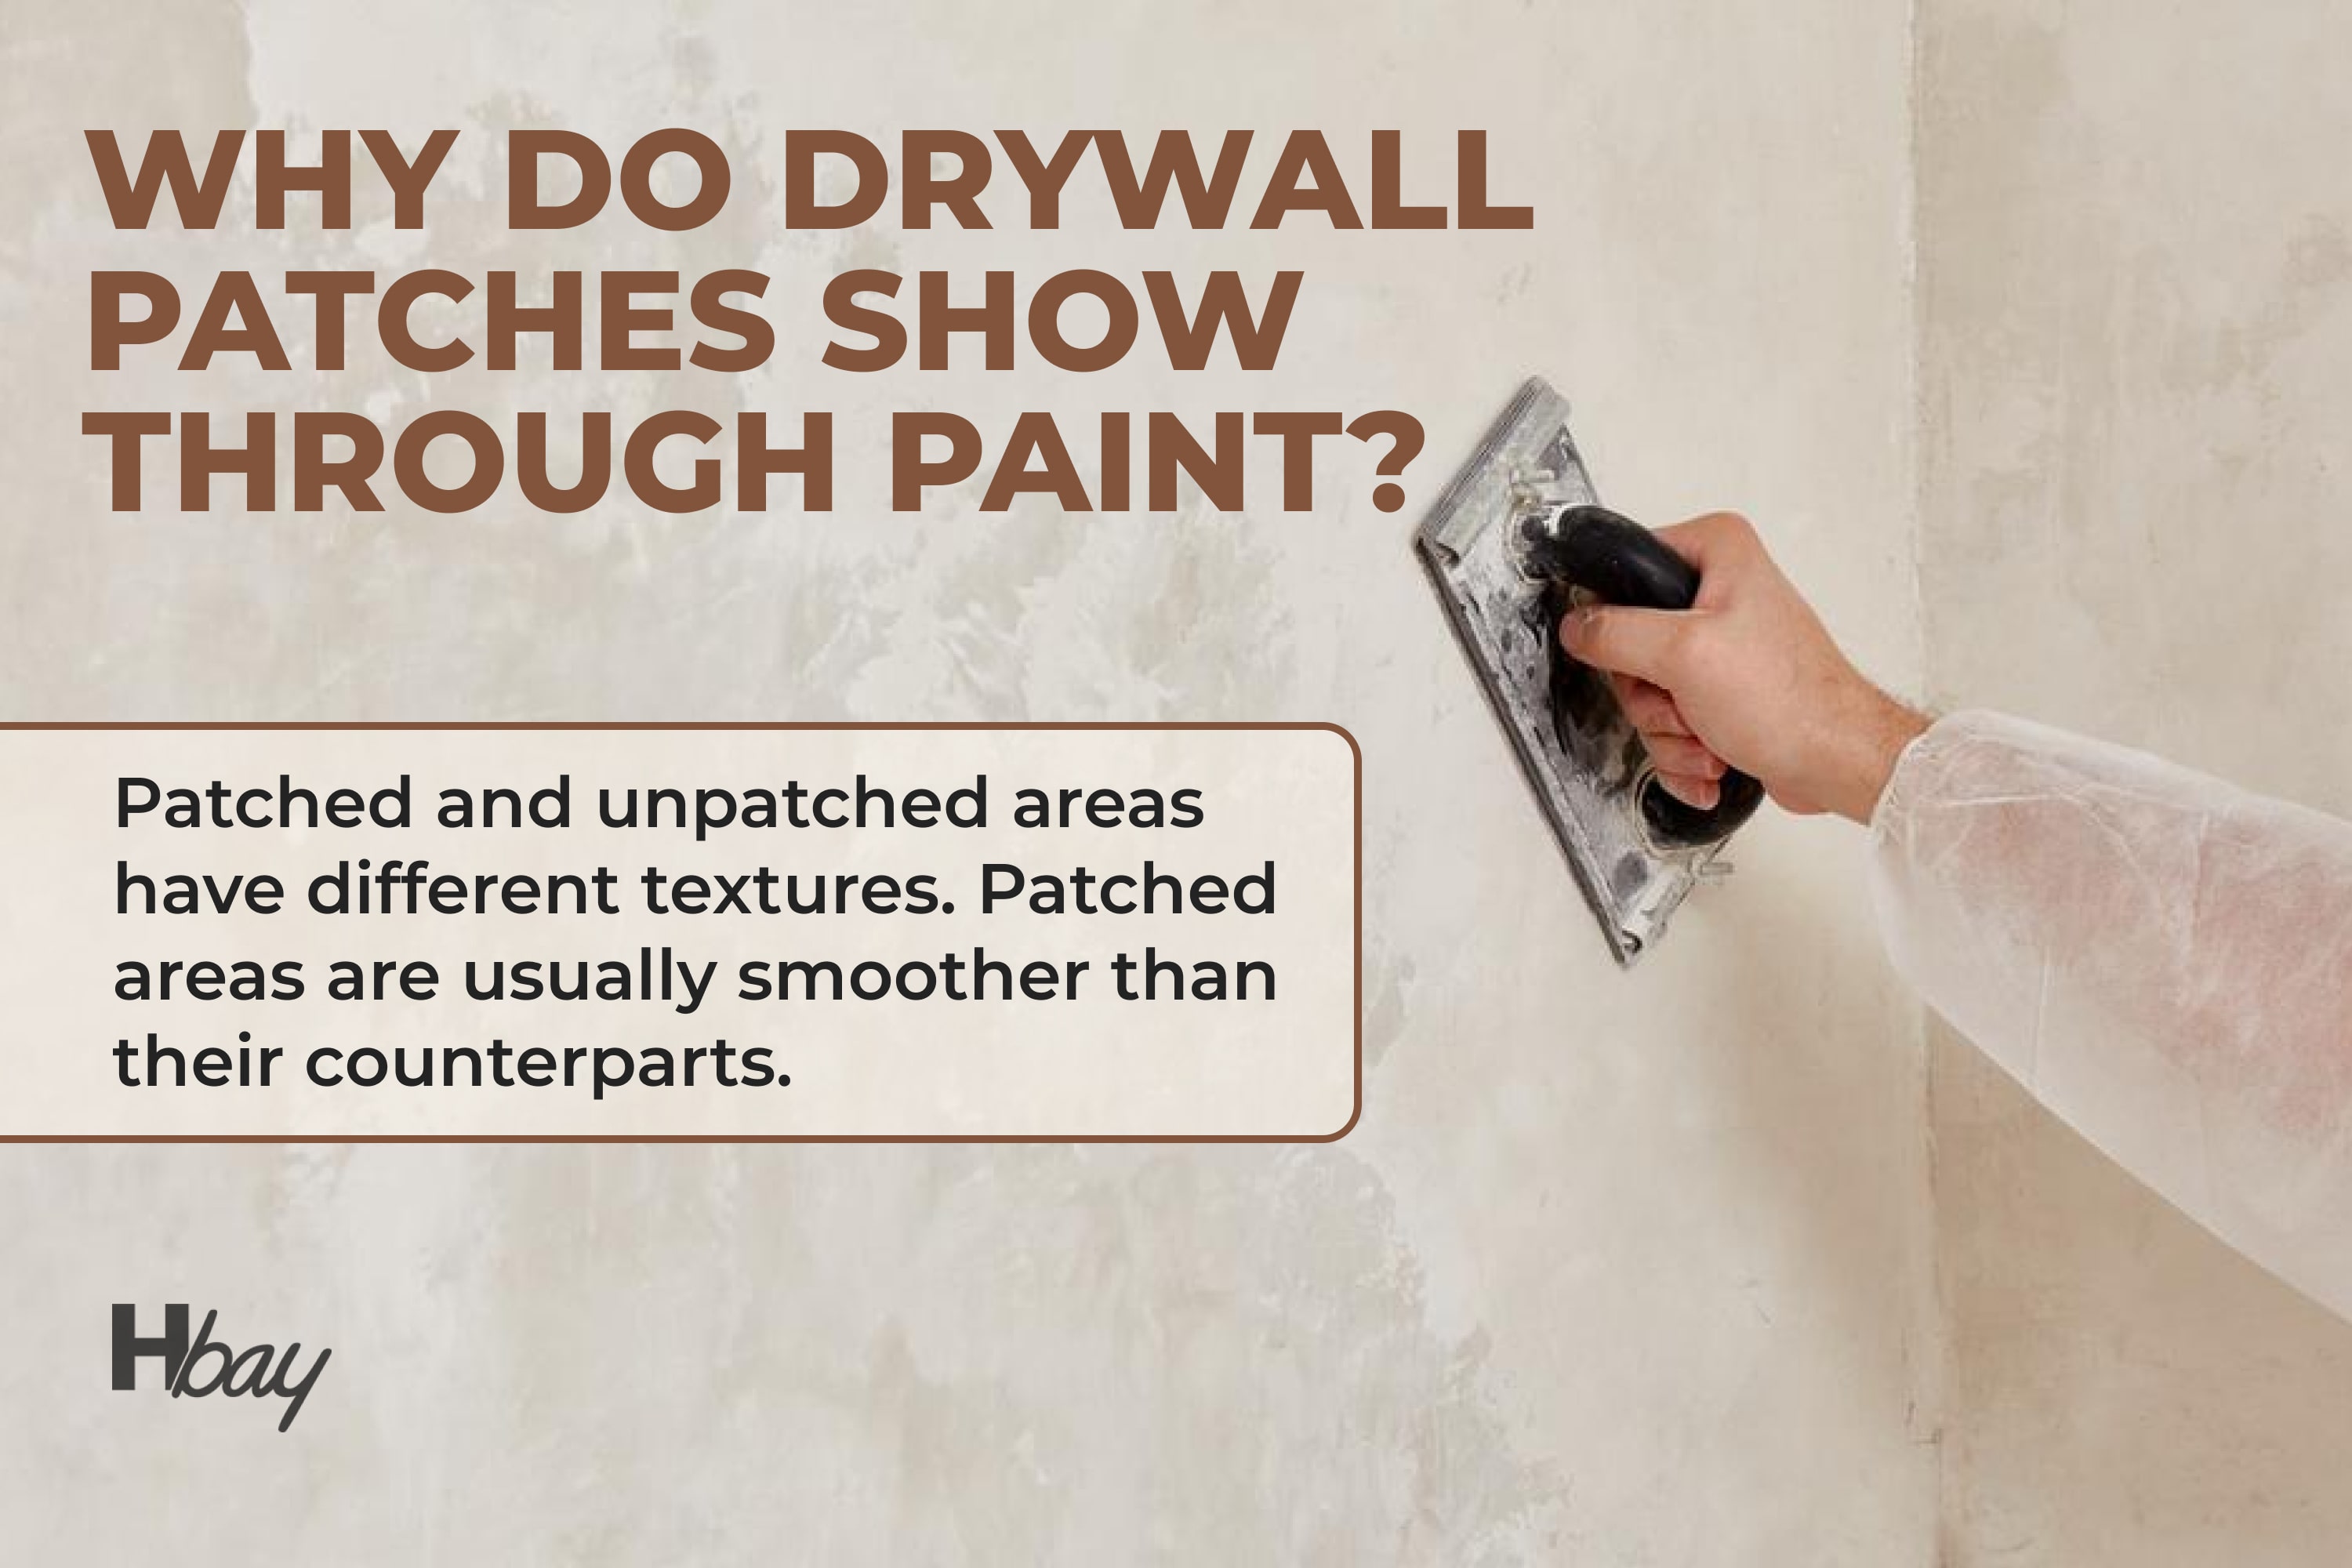 Why do drywall patches show through paint